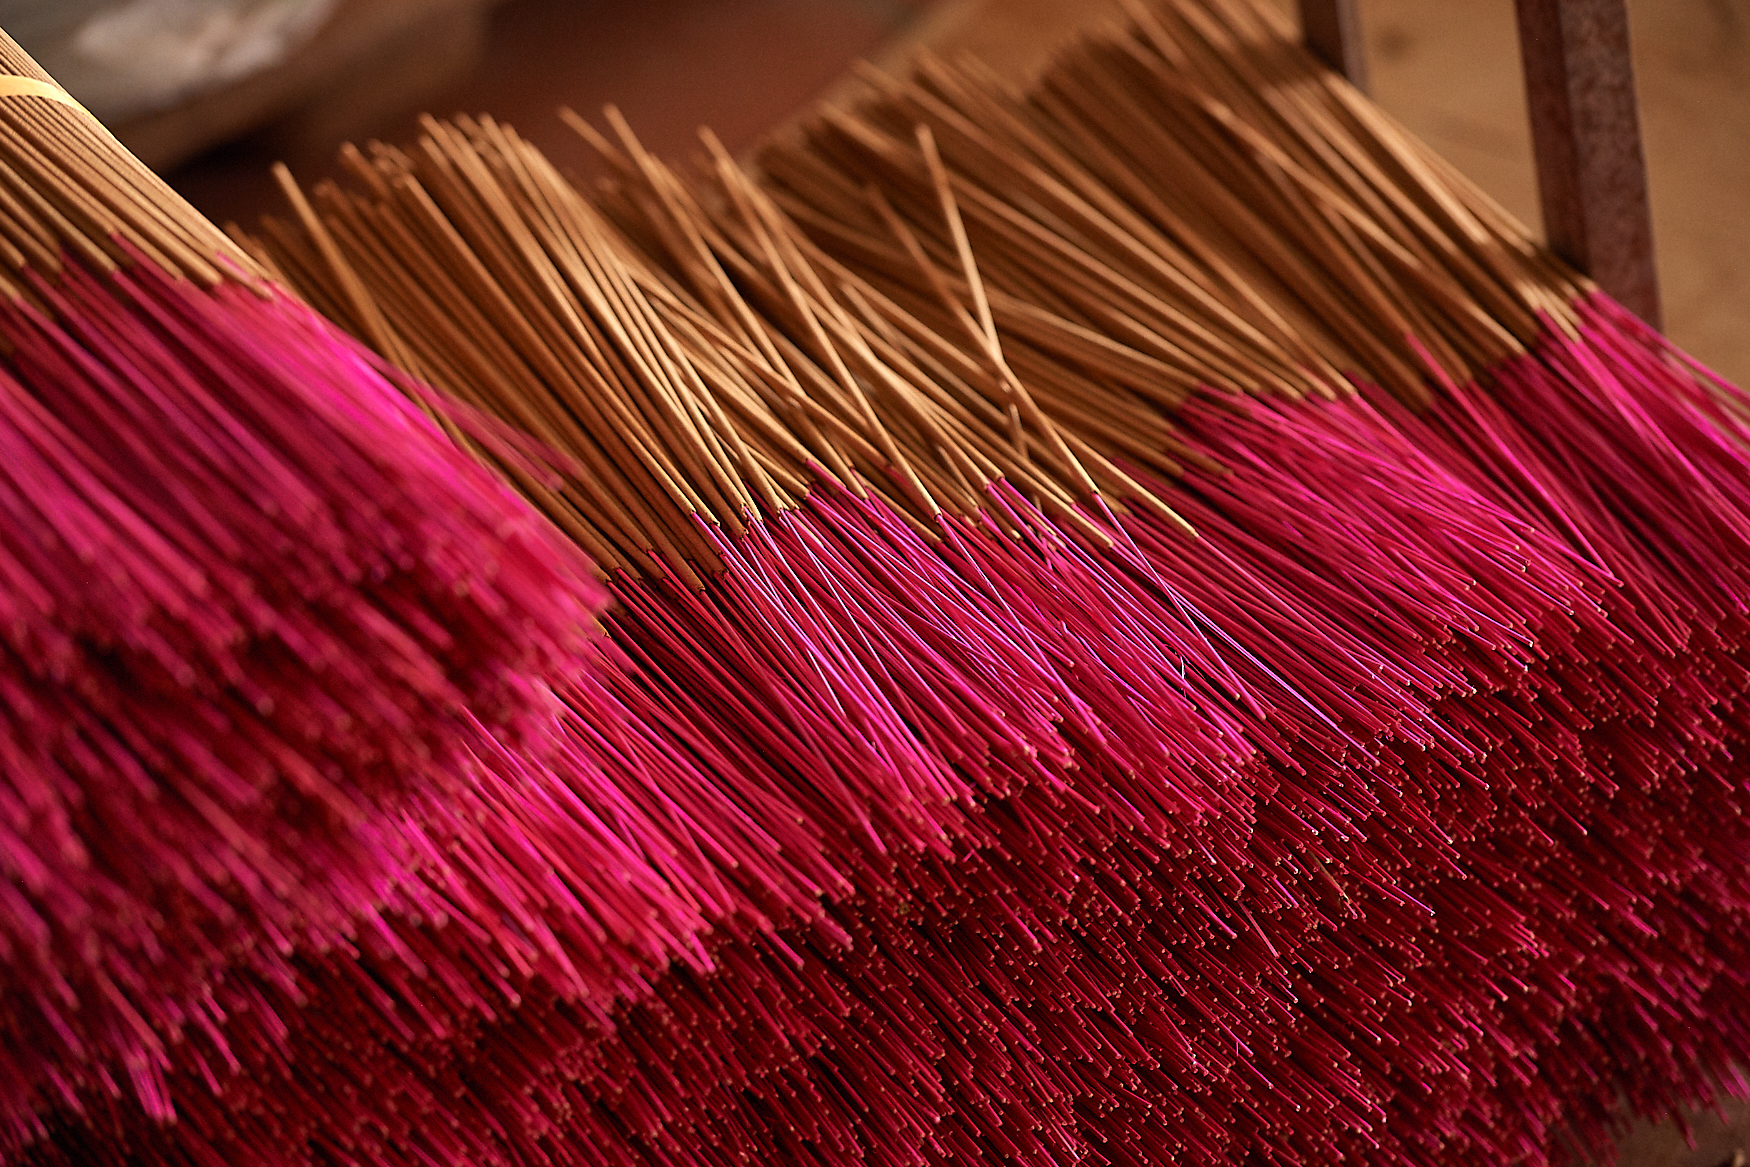 Dried incense sticks are prepared for packaging